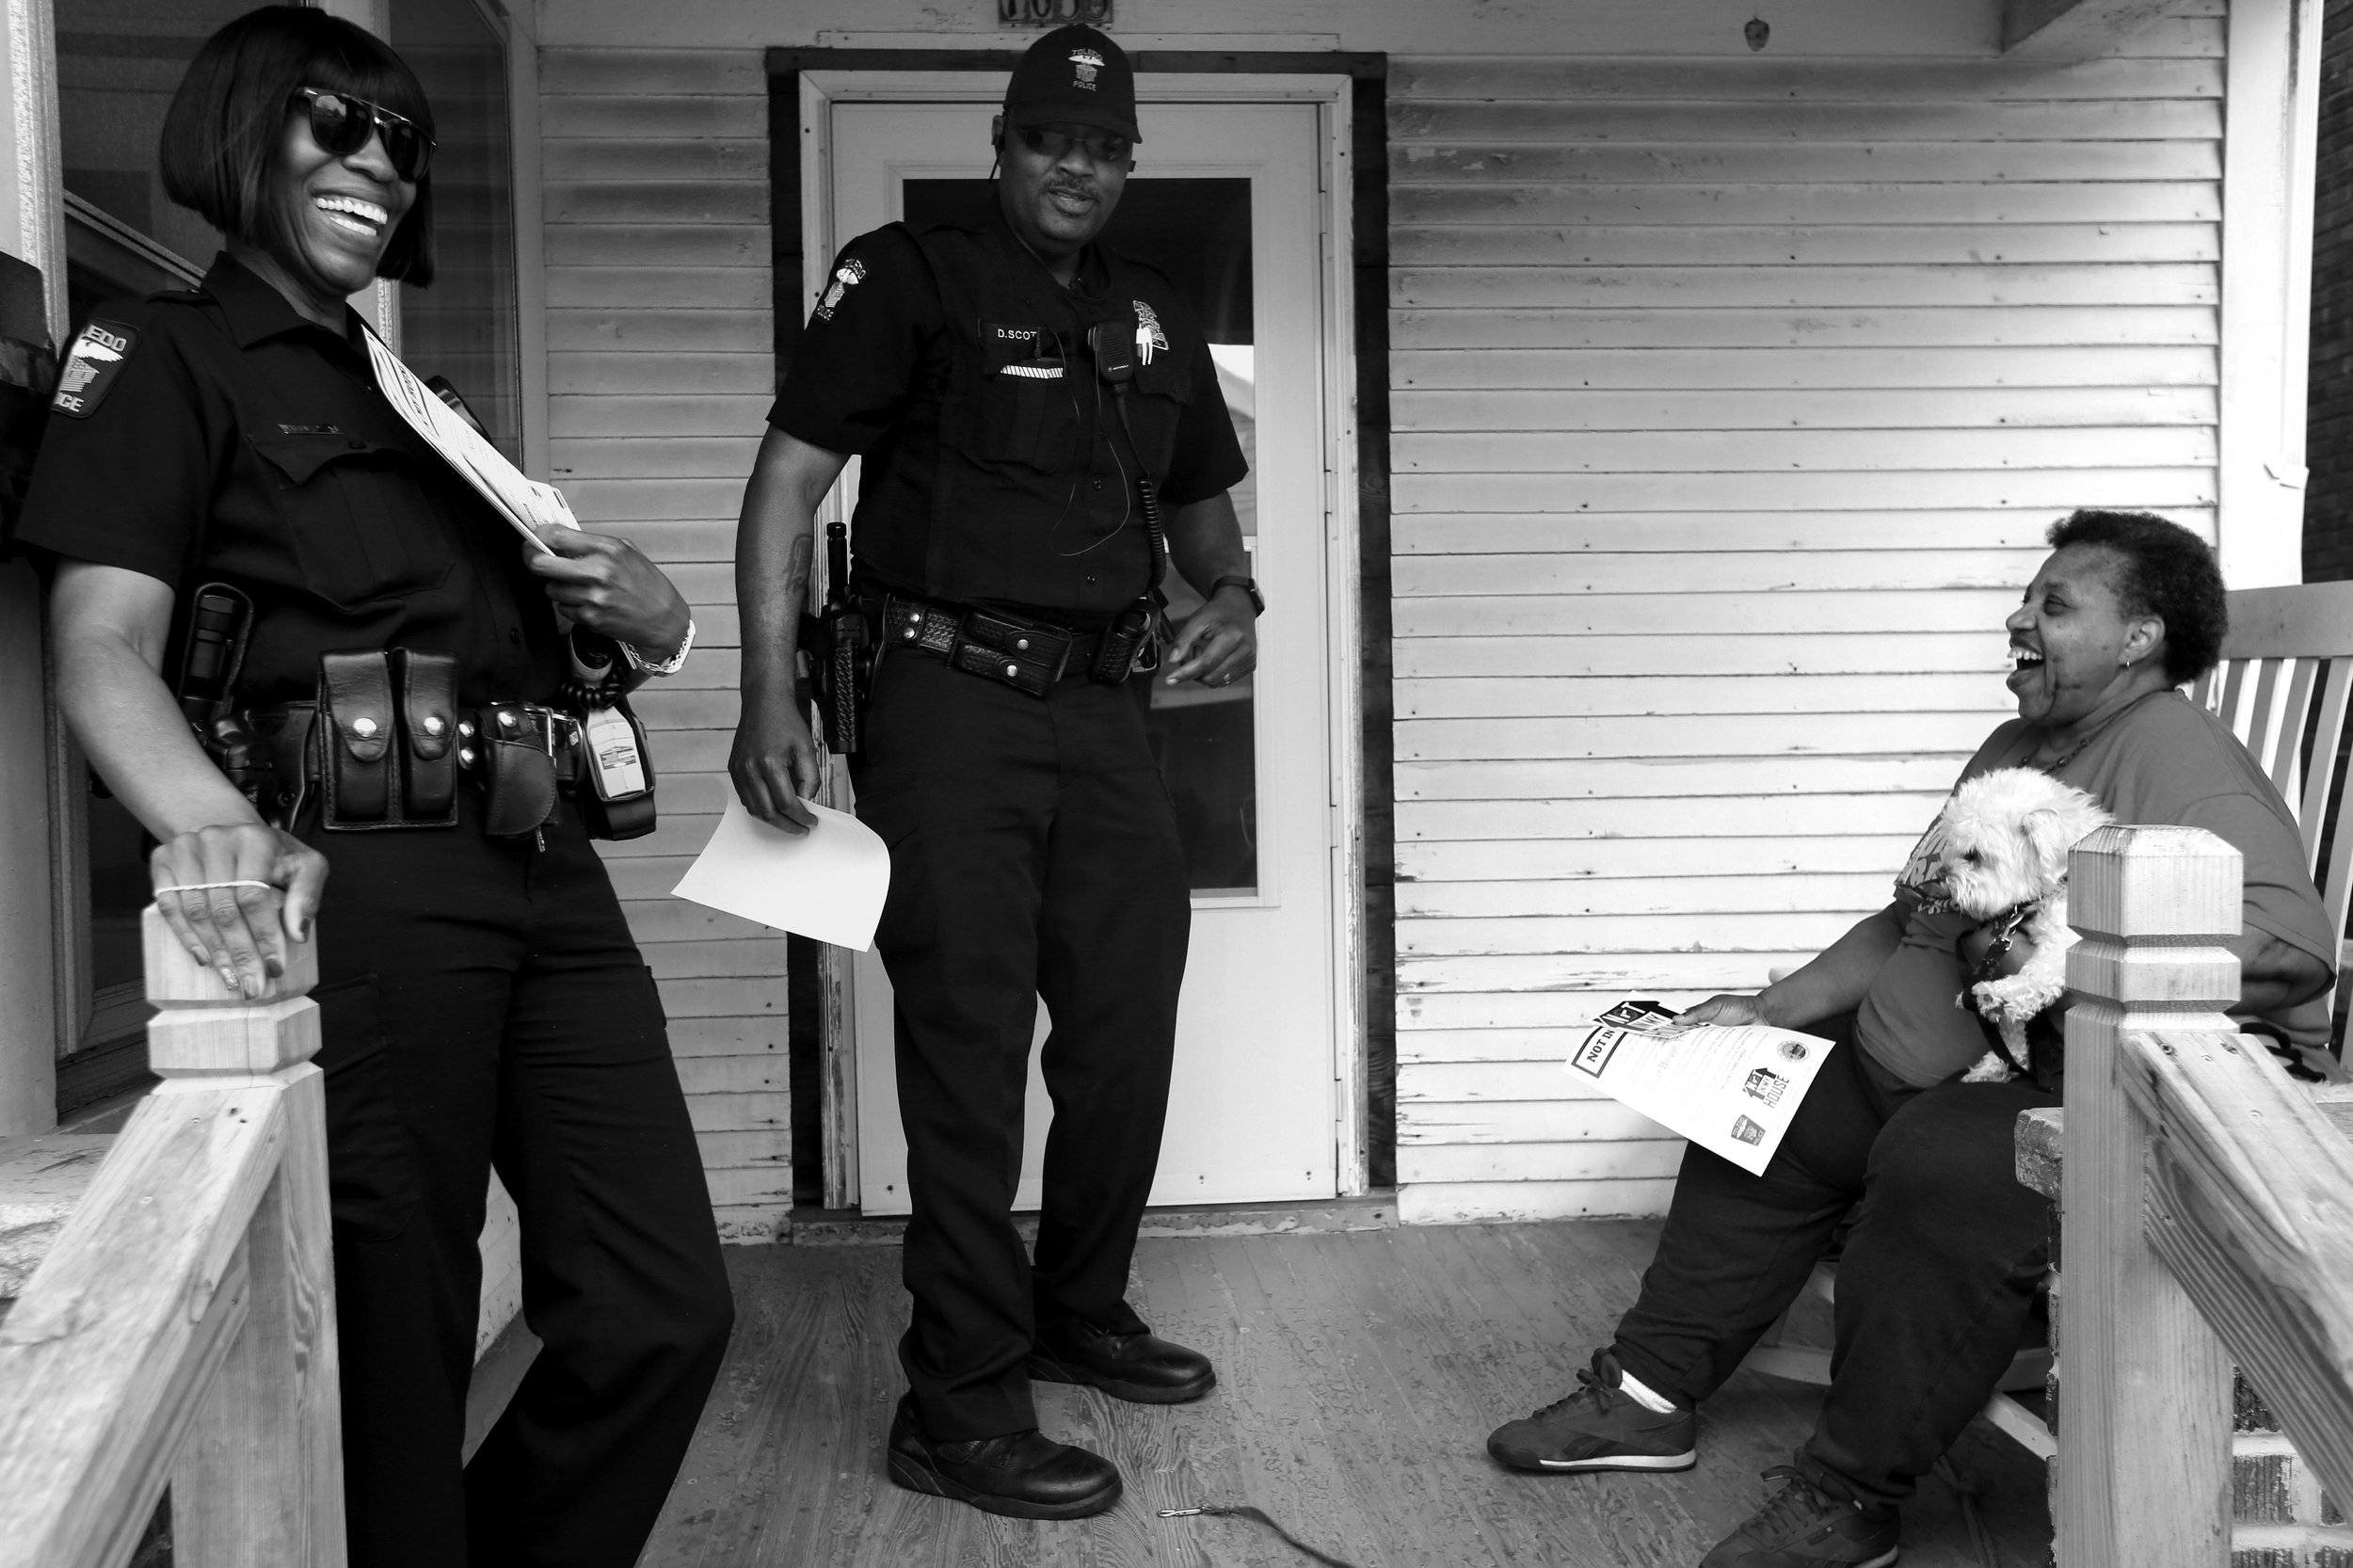  Toledo police Officers Melissa Stephens, left, and Donald Scott, center, joke with Constance Howell as the officers go door-to-door promoting a new program called, "Not in My House" on May 10, 2018. The new initiative allows Toledo residents to call